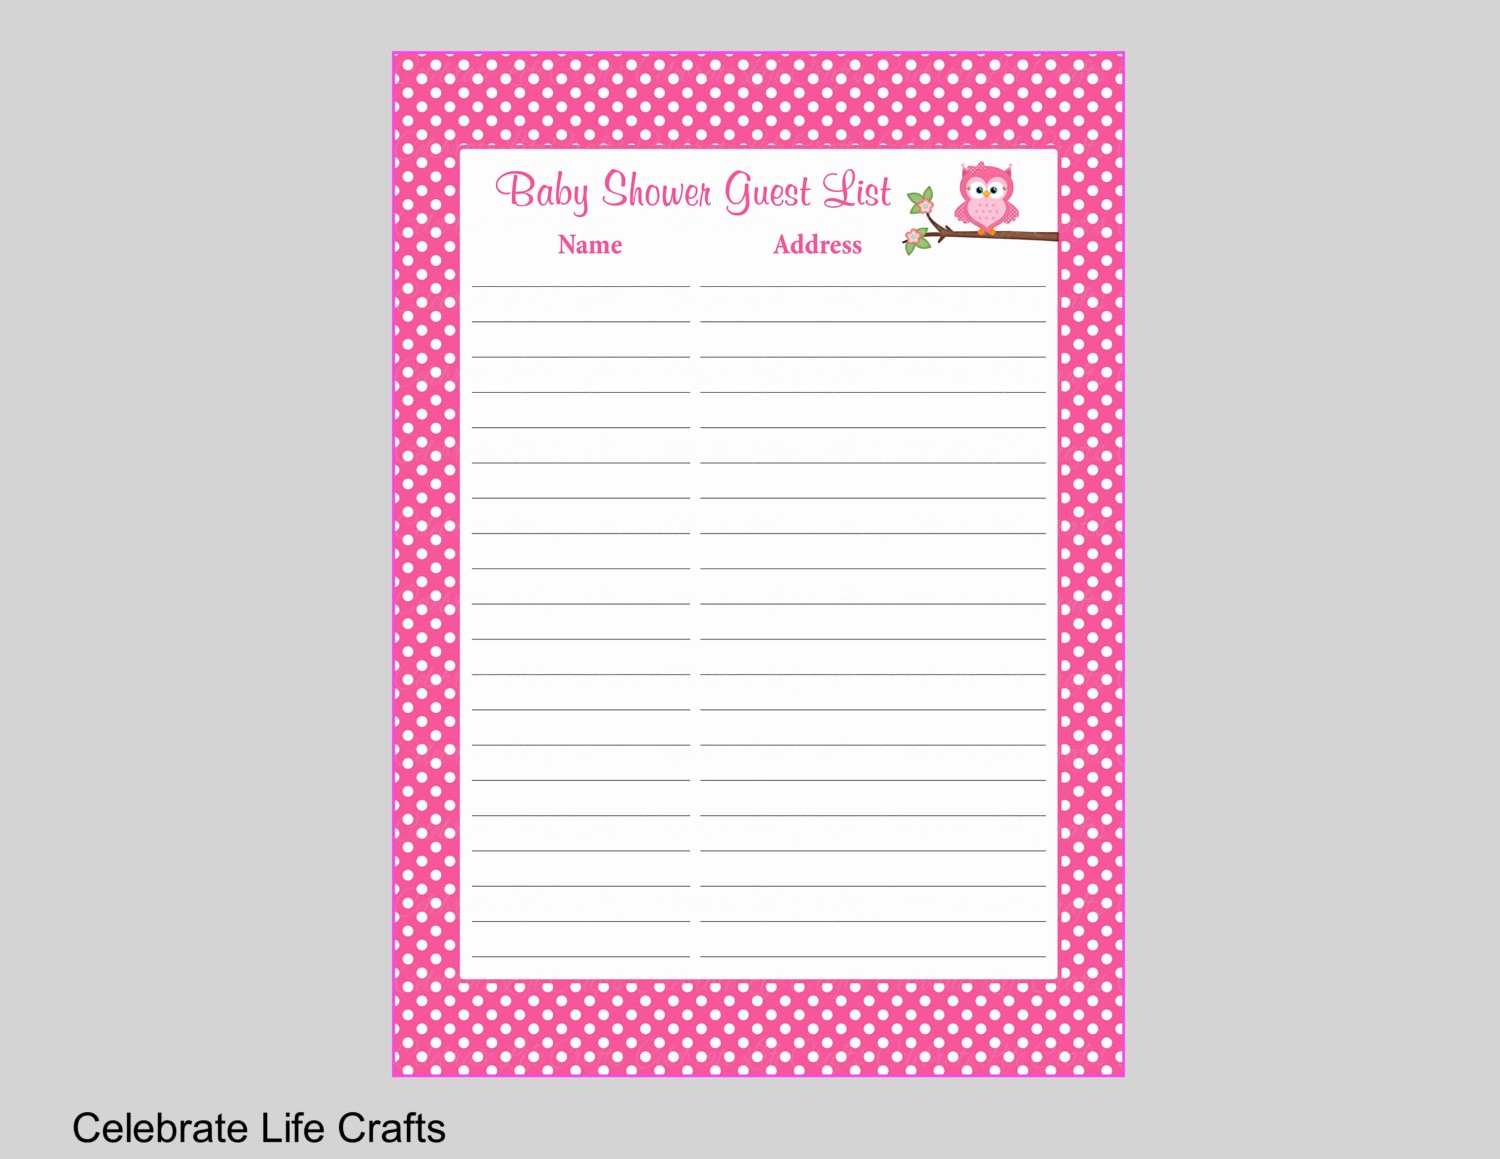 Baby Shower Guest List Printable Awesome Owl Baby Shower Guest List Printable Sign In Sheet with